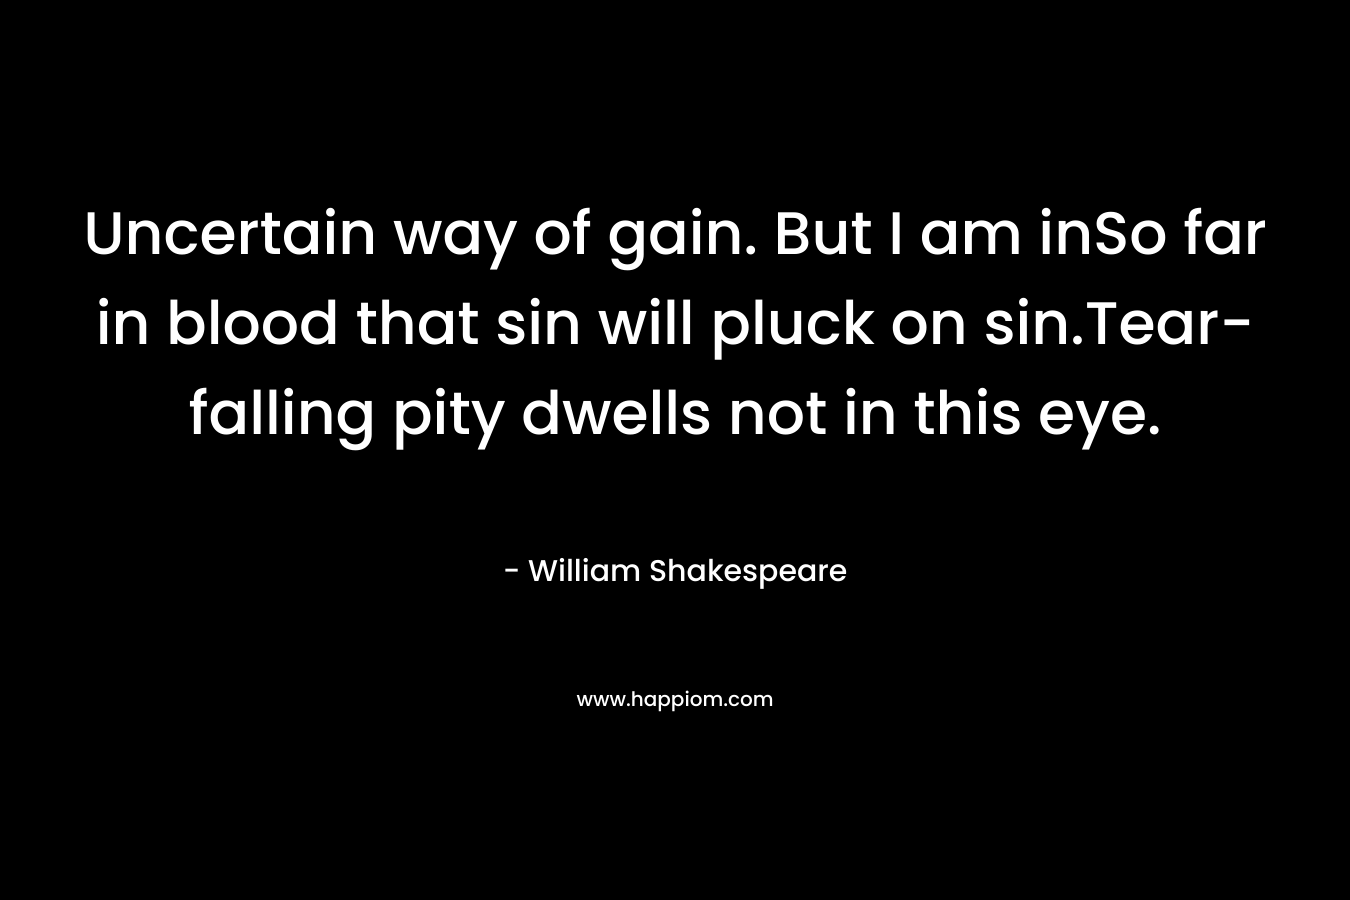 Uncertain way of gain. But I am inSo far in blood that sin will pluck on sin.Tear-falling pity dwells not in this eye. – William Shakespeare